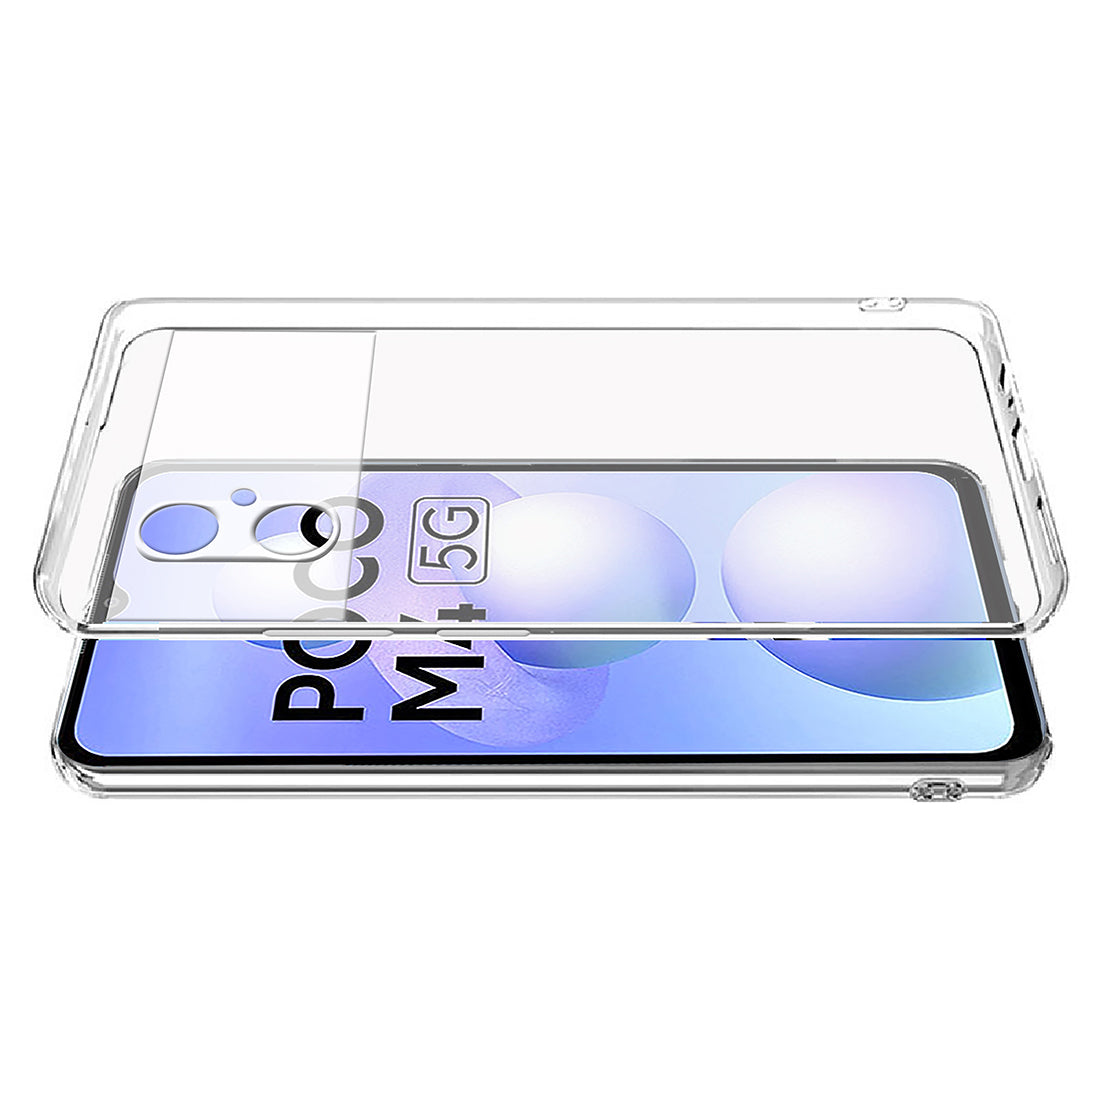 Clear Case for Poco M4 5G